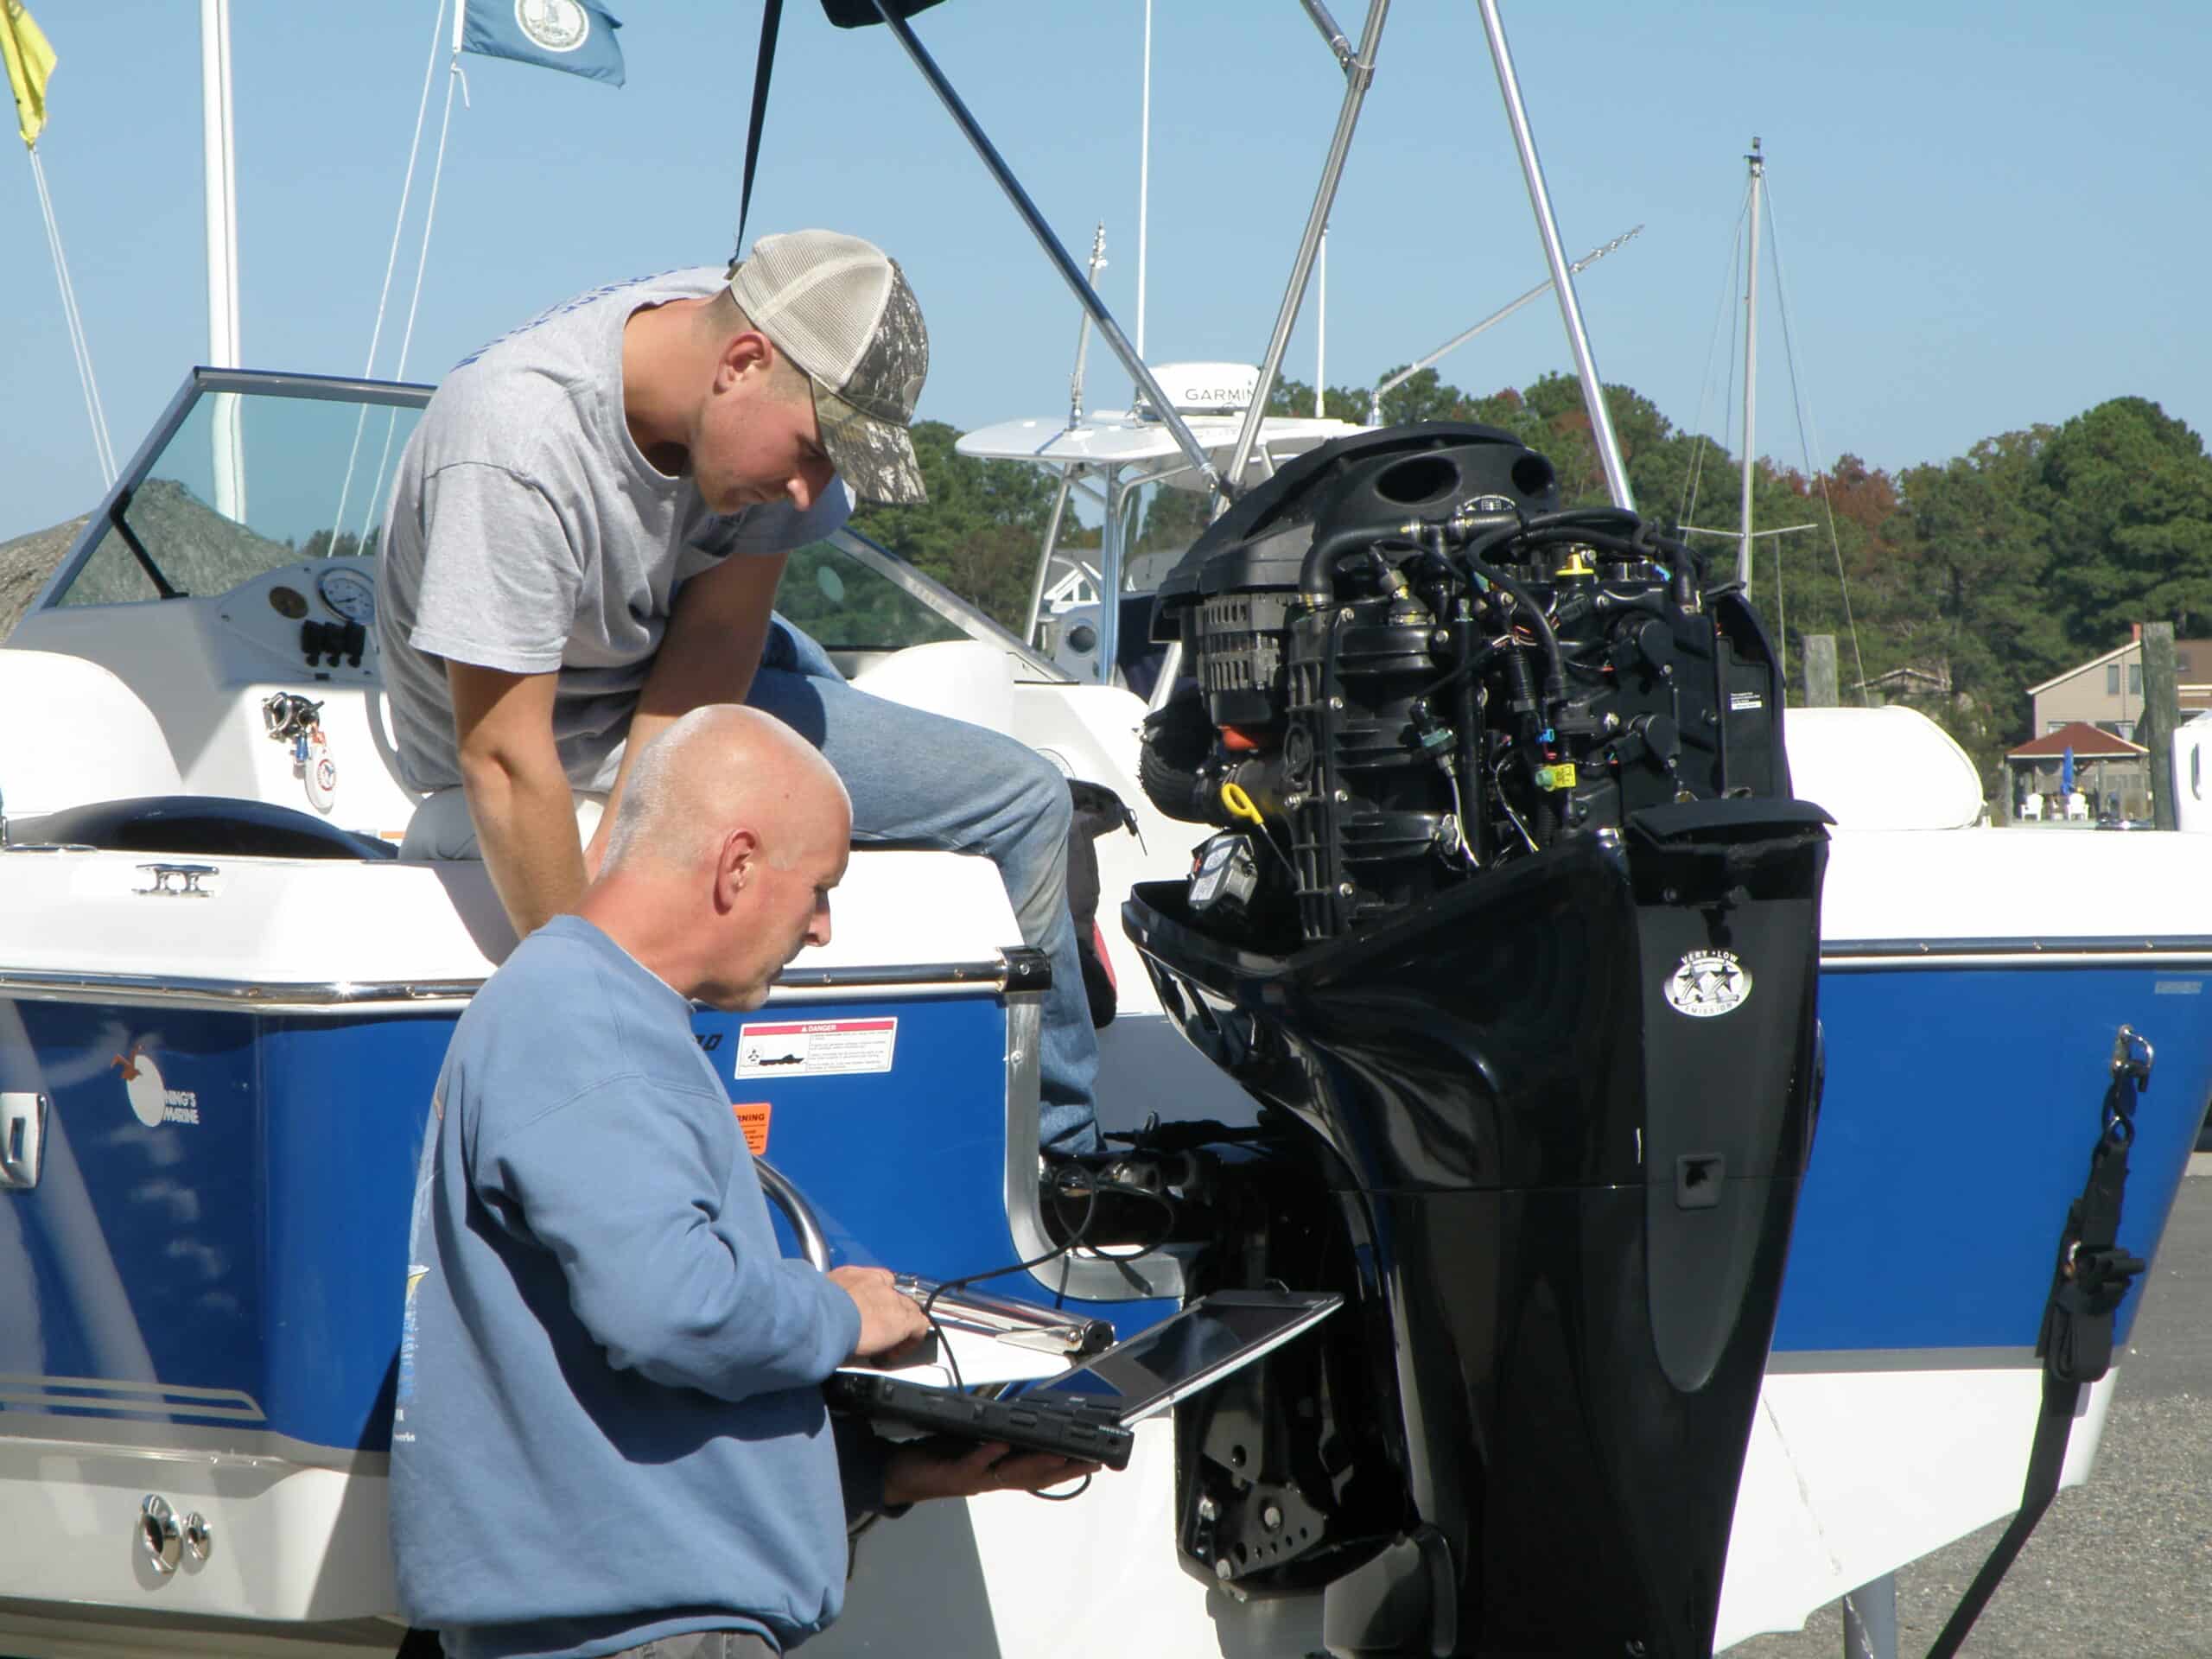 outboard service